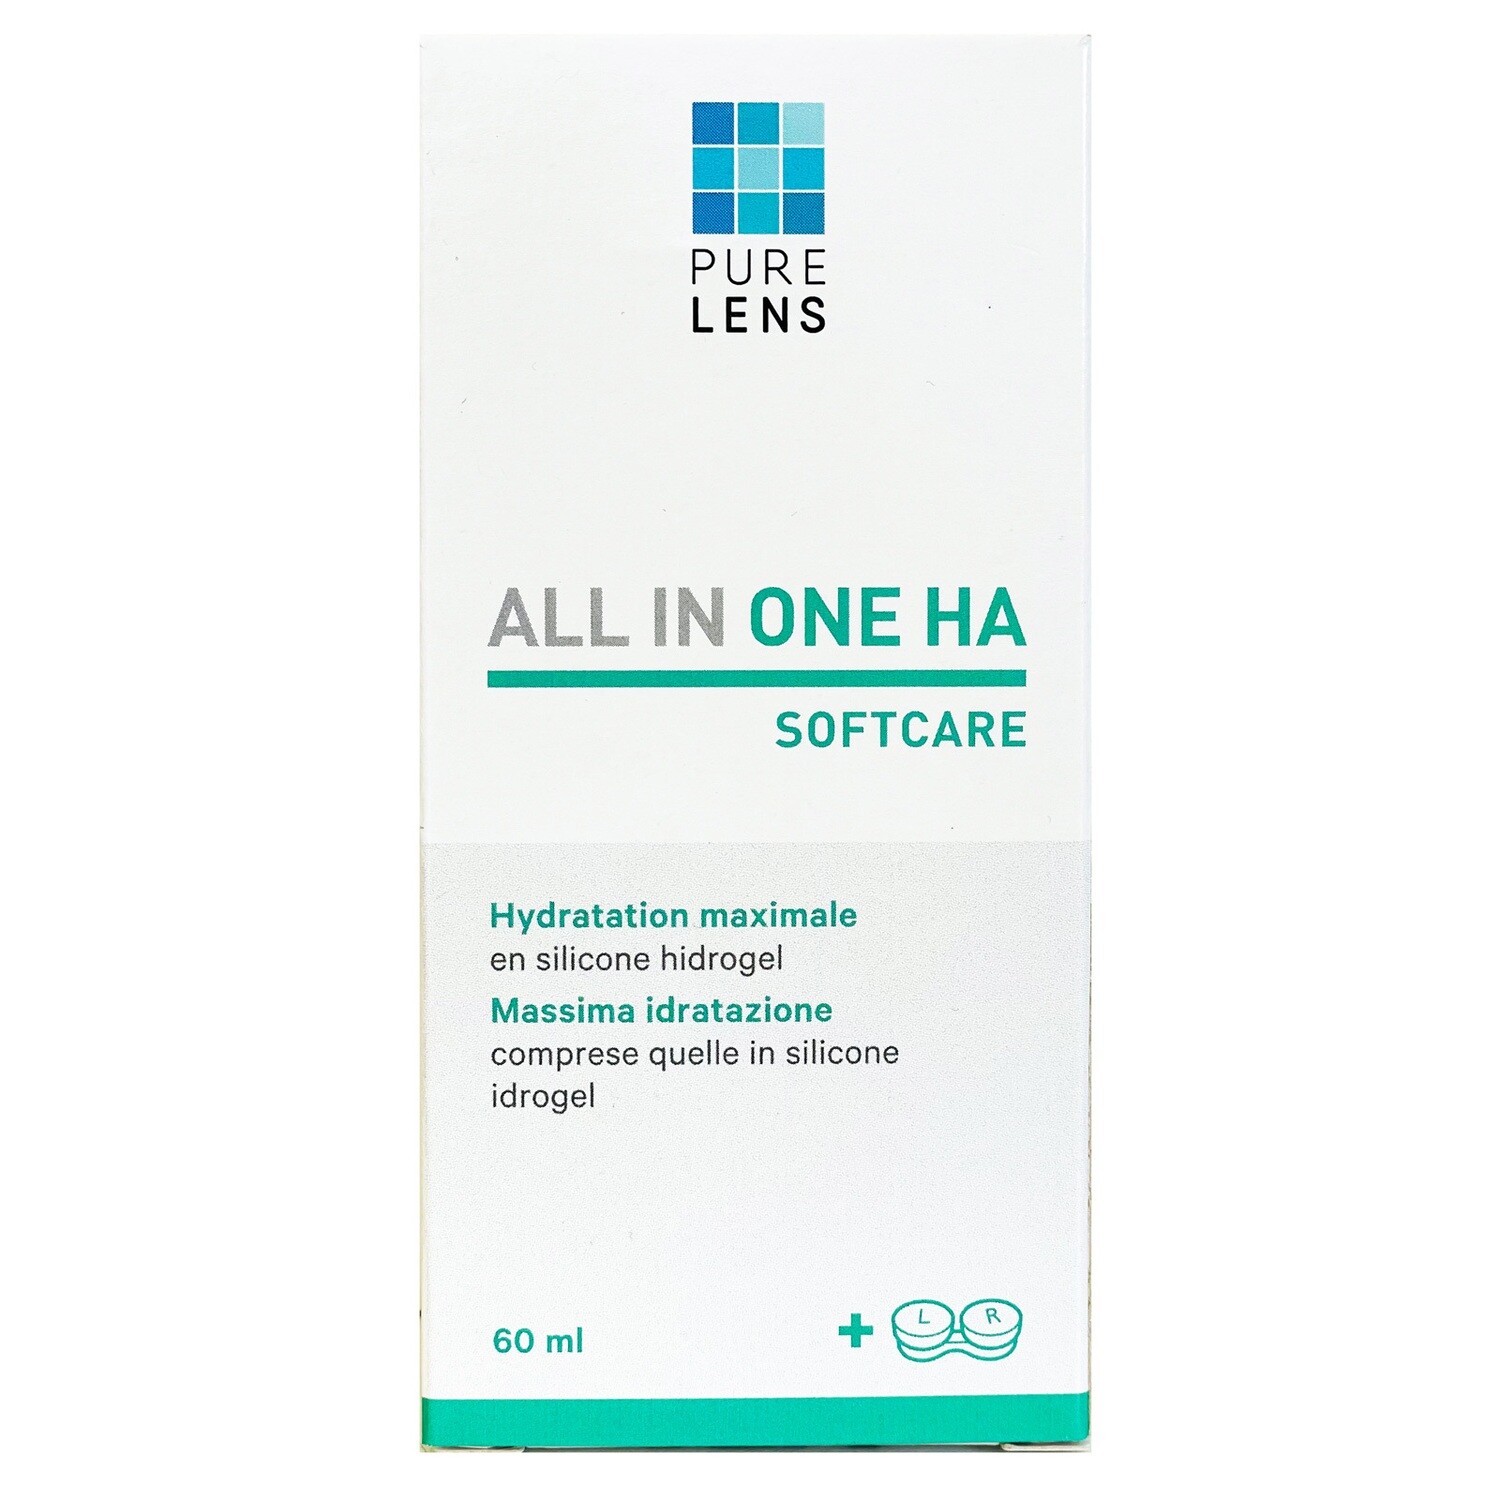 Softcare - All in One HA (60ml)